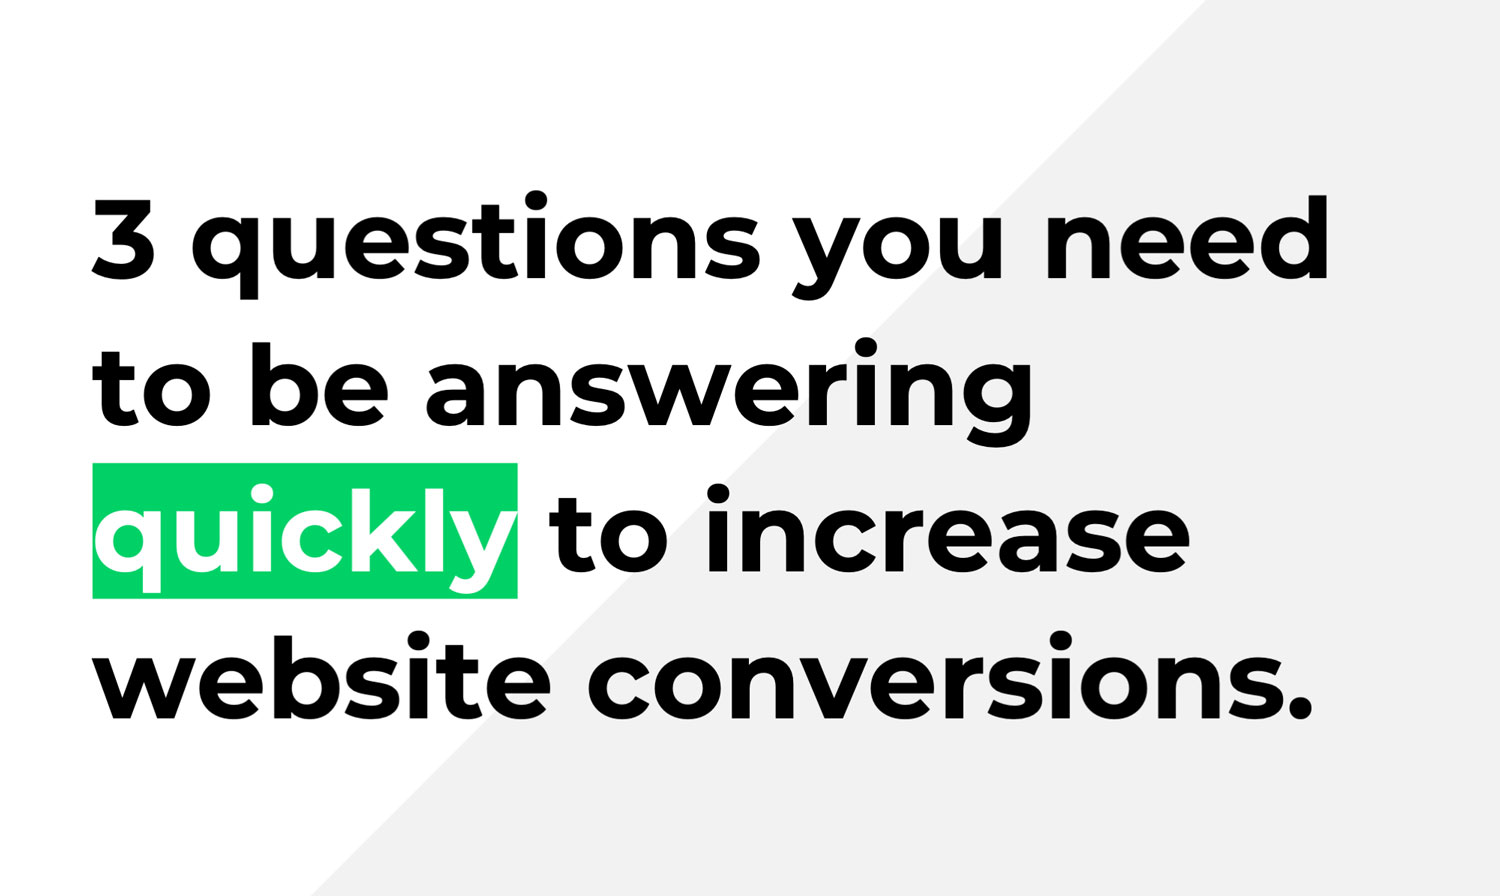 3 questions you need to be answering quickly to increase website conversion